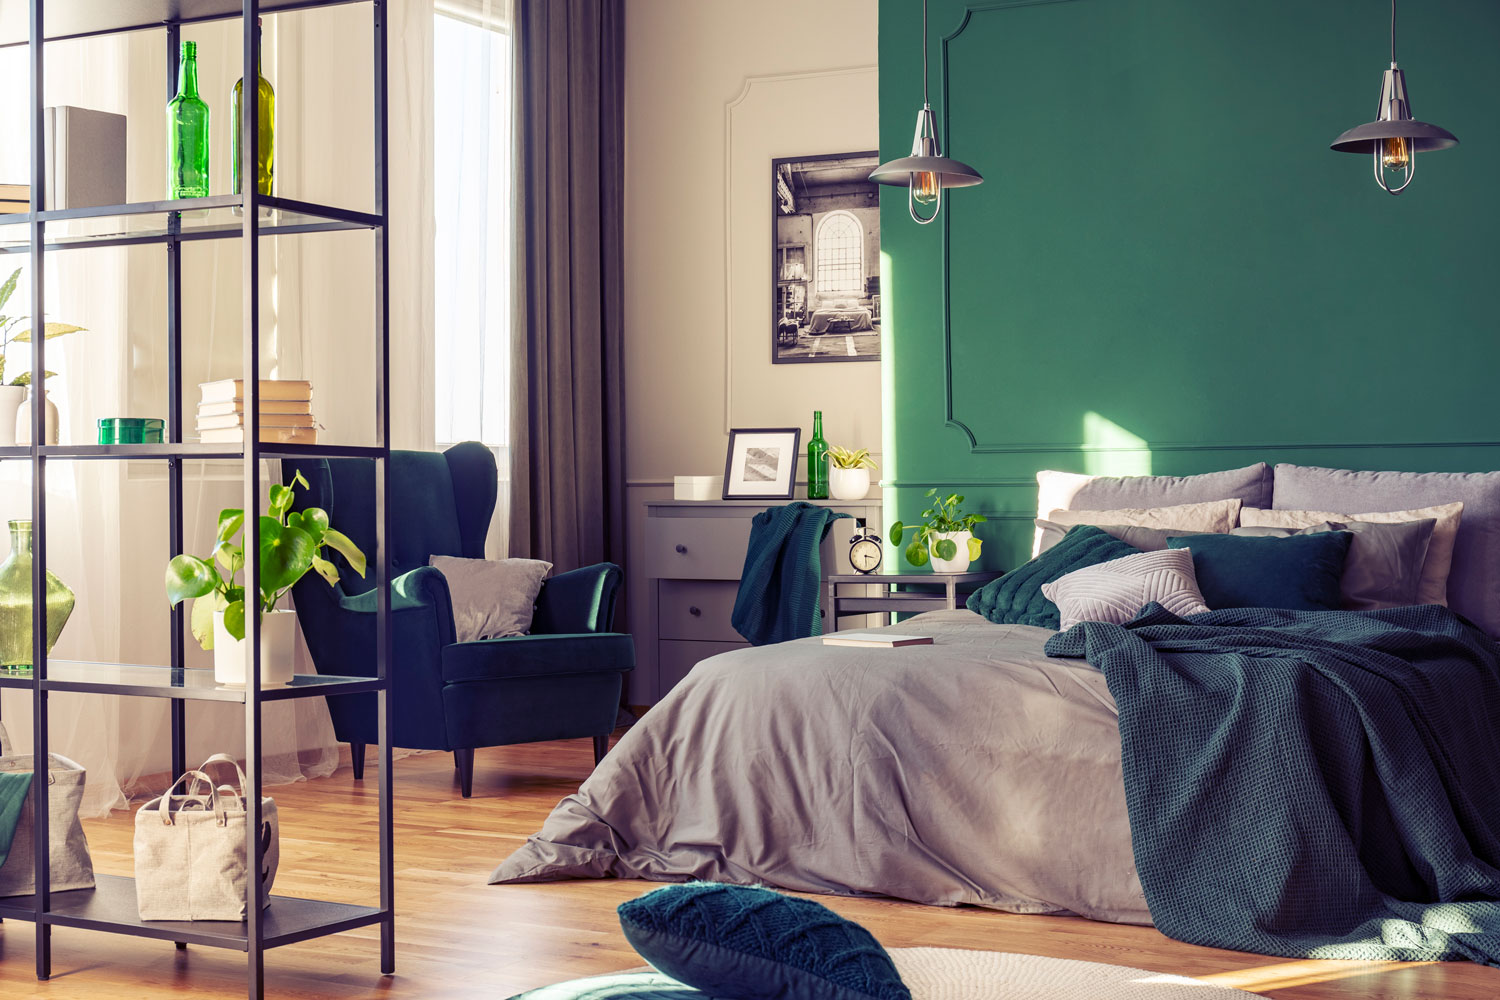 Minimalist bedroom with green accent walls and green and gray beddings with plants for vibrancy